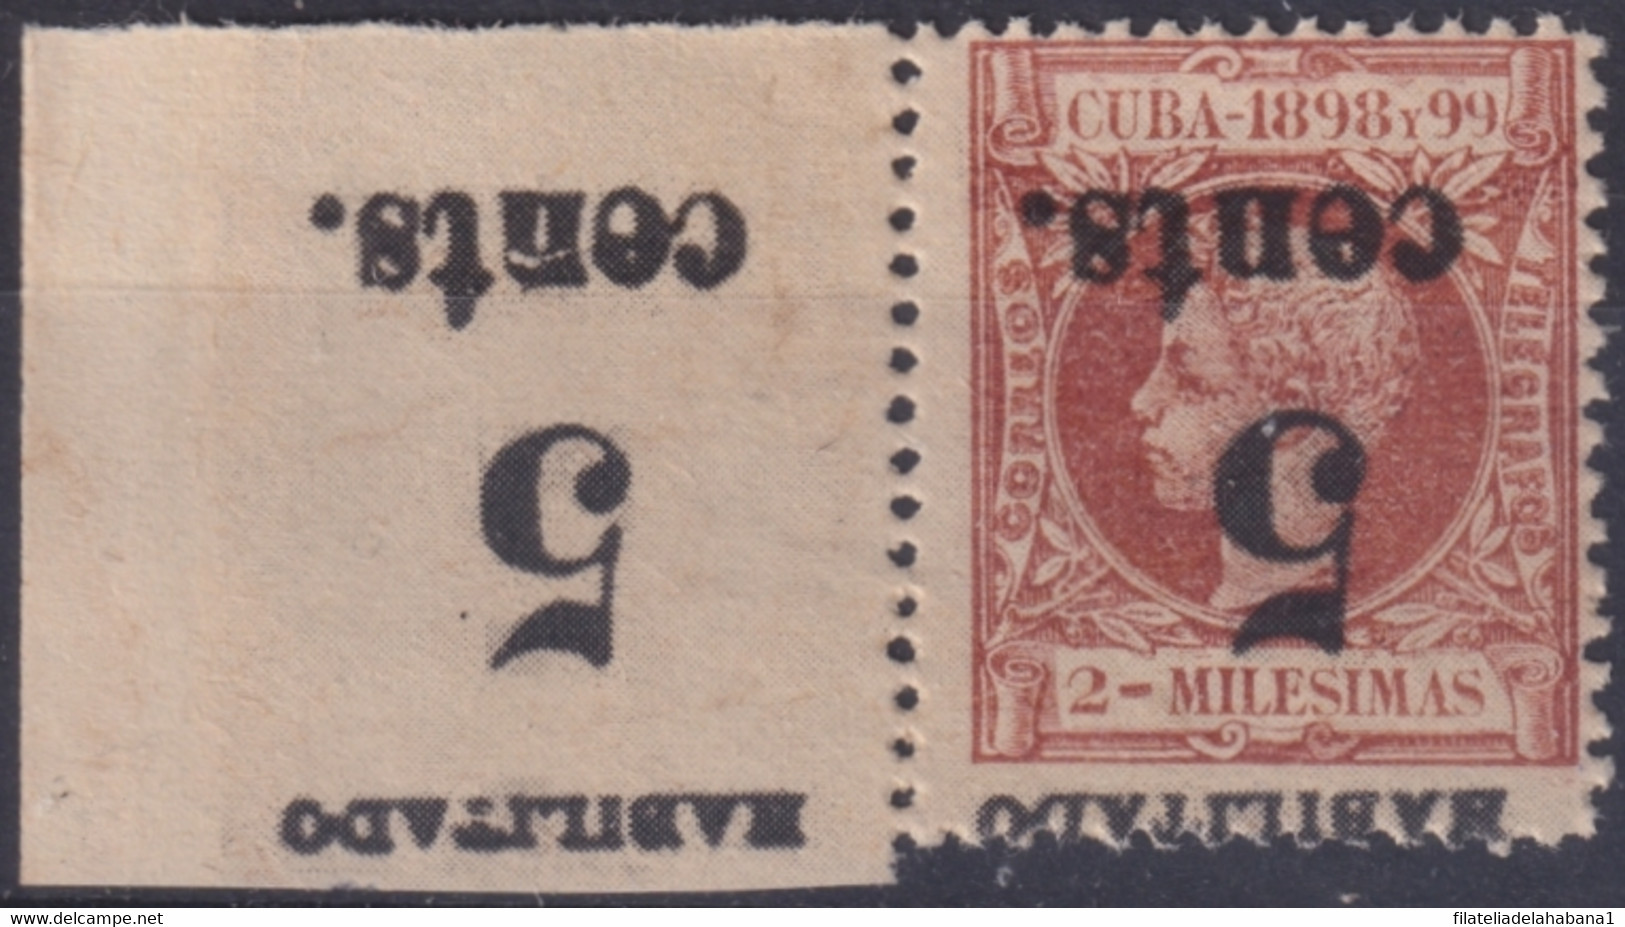 1899-484 CUBA 1899 5c S. 2m US OCCUPATION 2th ISSUE INVERTED PHILATELIC FORGERY. - Nuovi